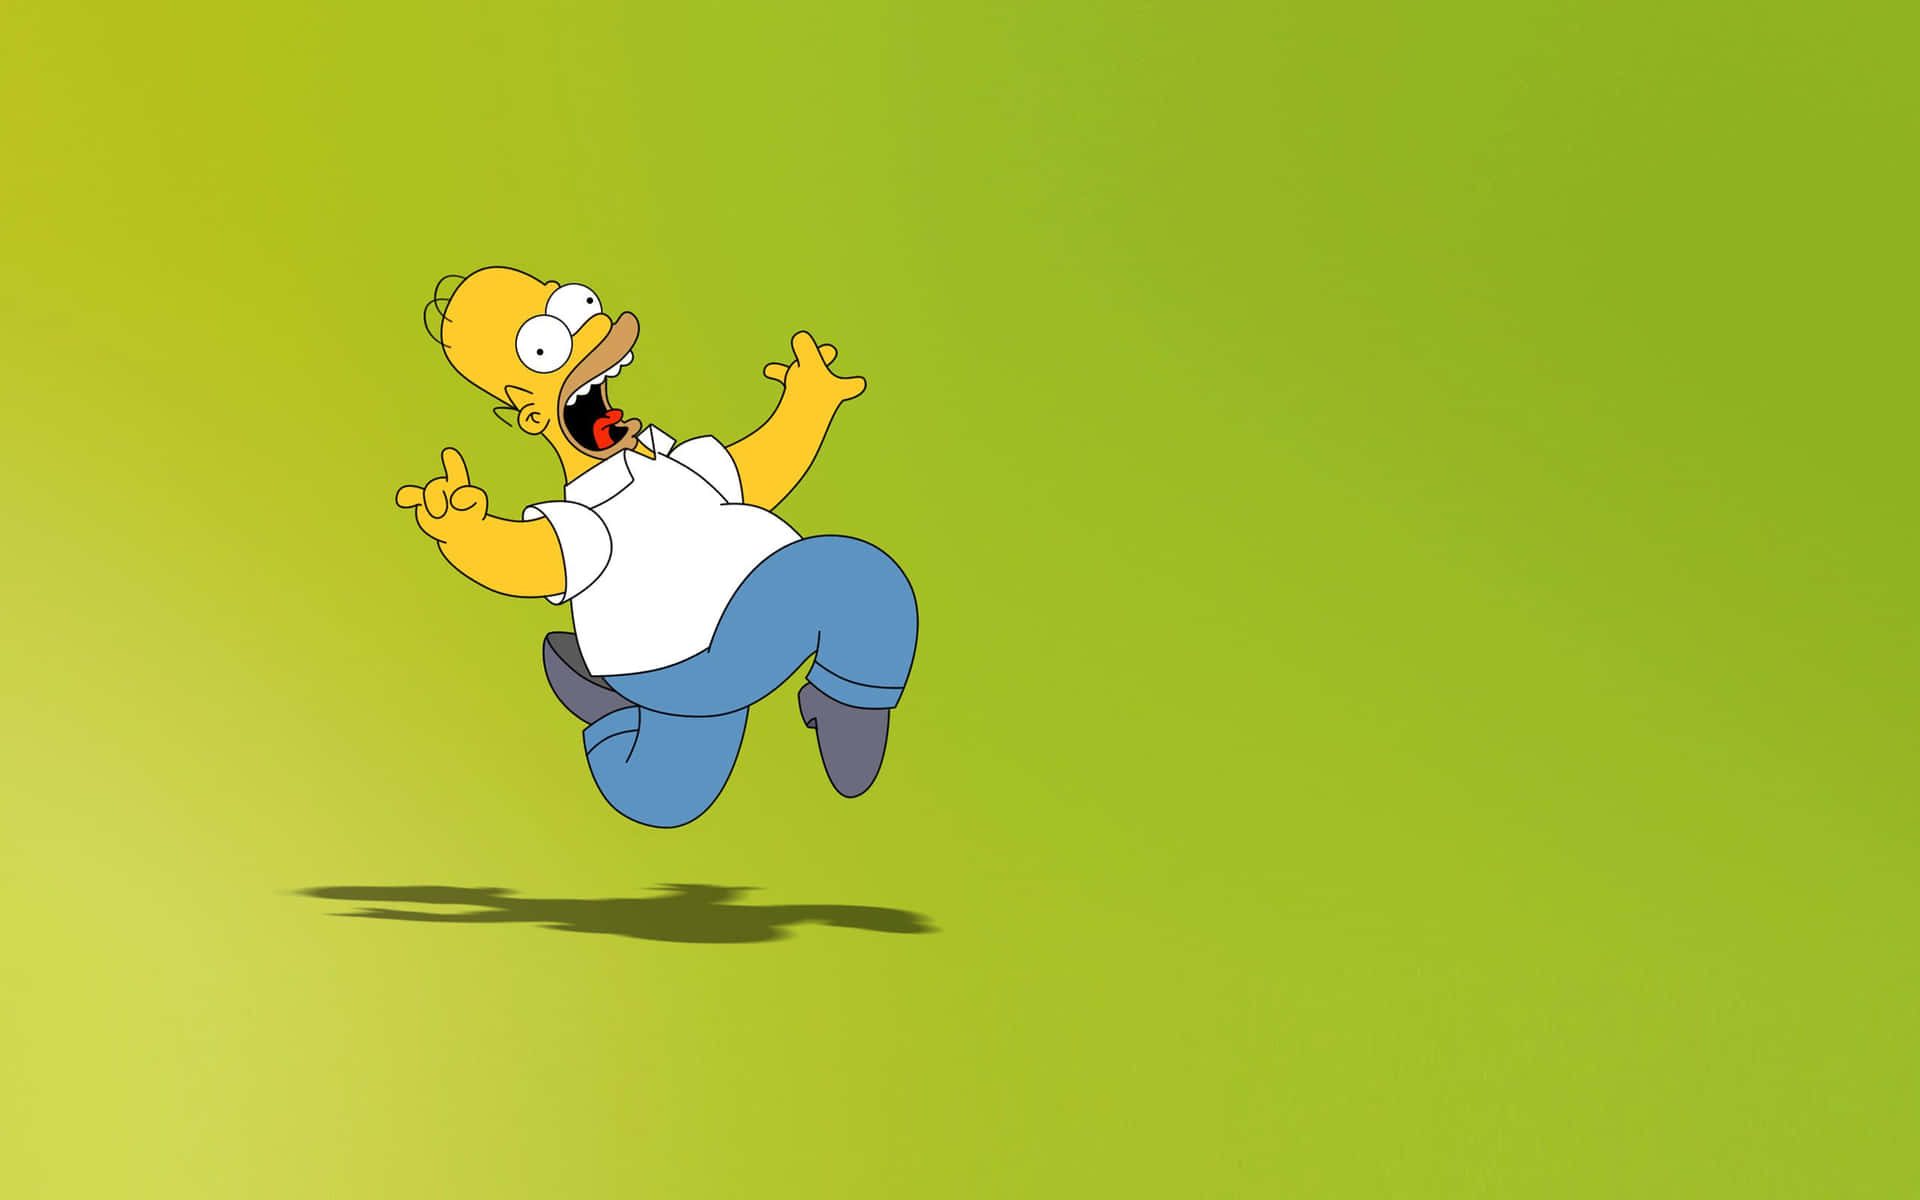 It’s Time to Get Your Homer on with Simpsons PC Wallpaper